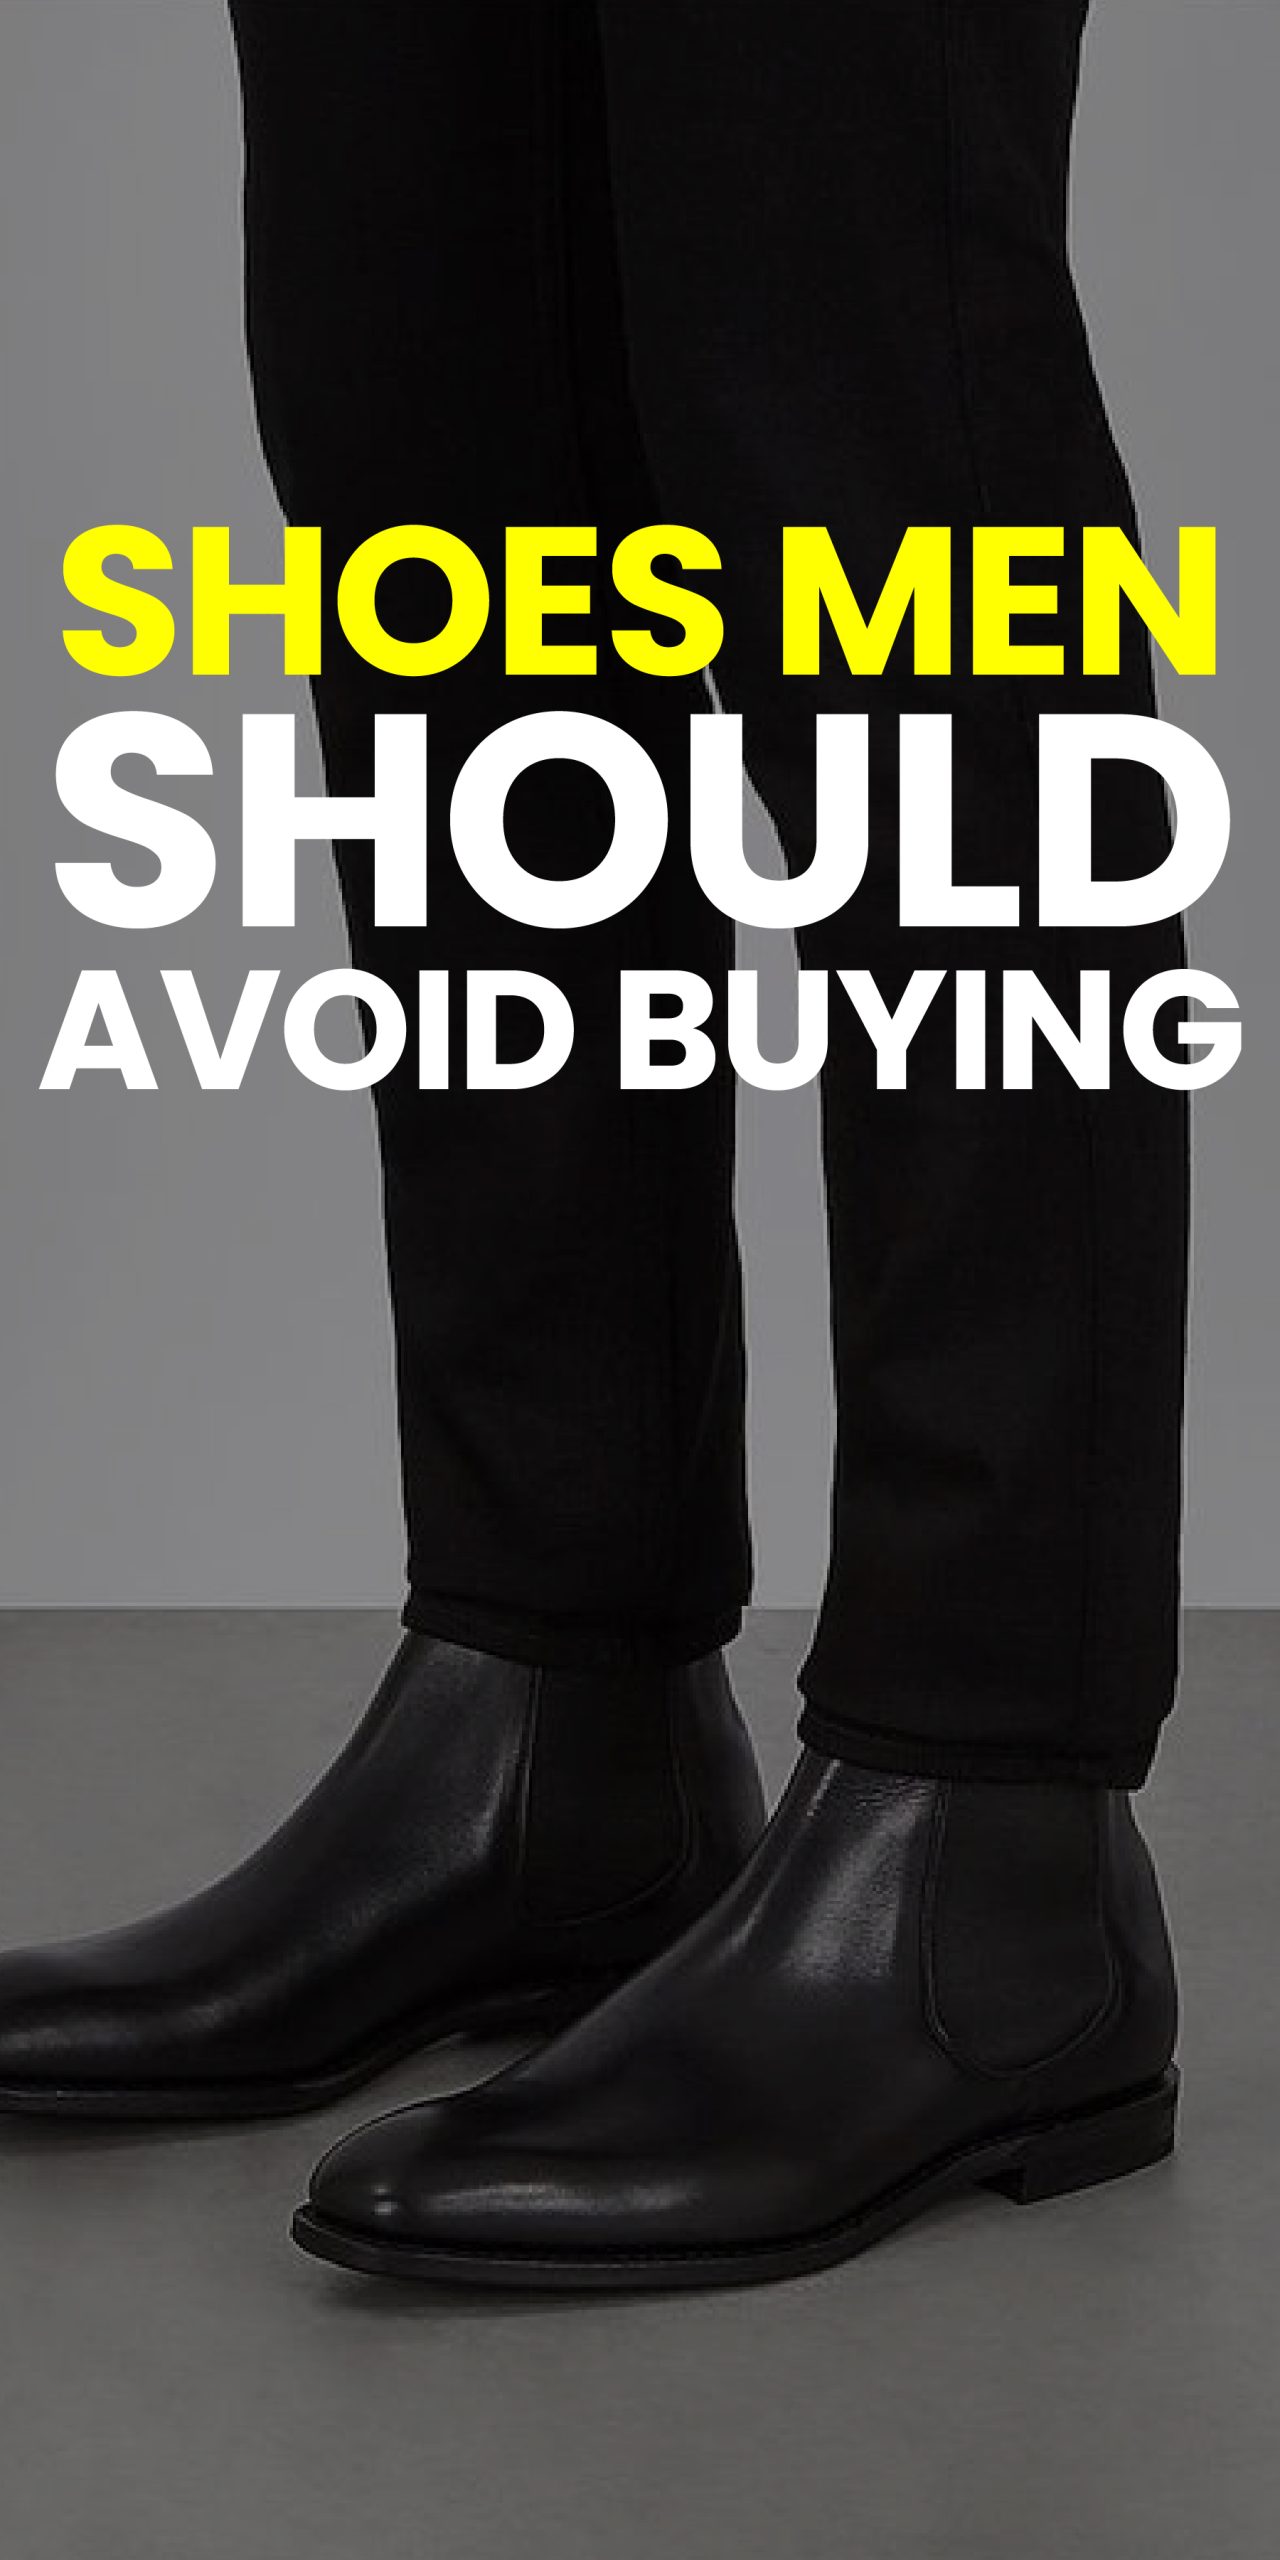 SHOES MEN SHOULD AVOID BUYING